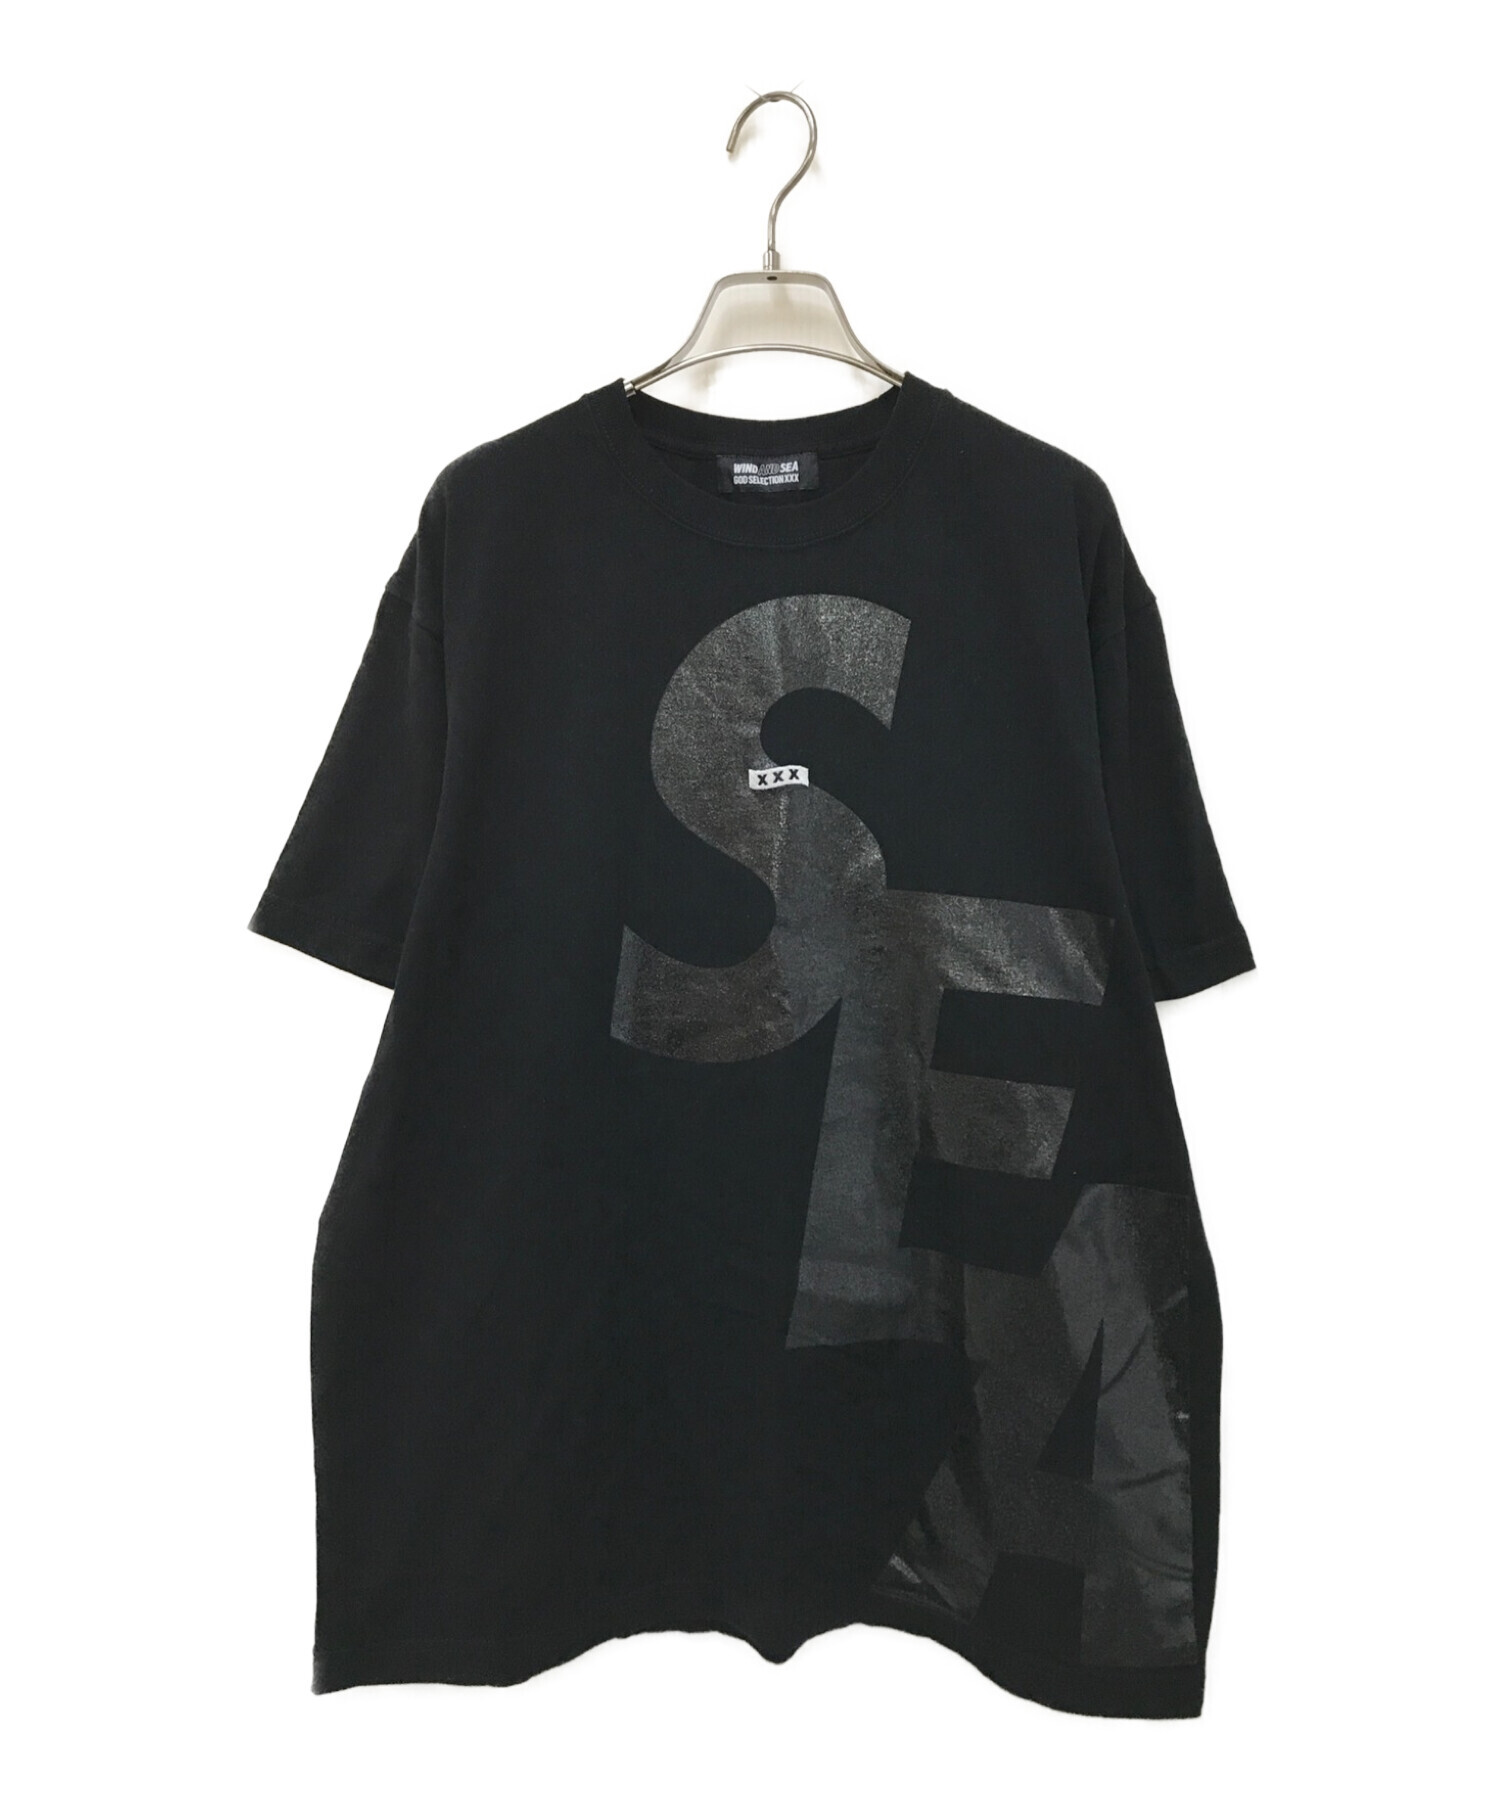 S WIND AND SEA GOD SELECTION Tee BlackTシャツ/カットソー(半袖/袖なし)